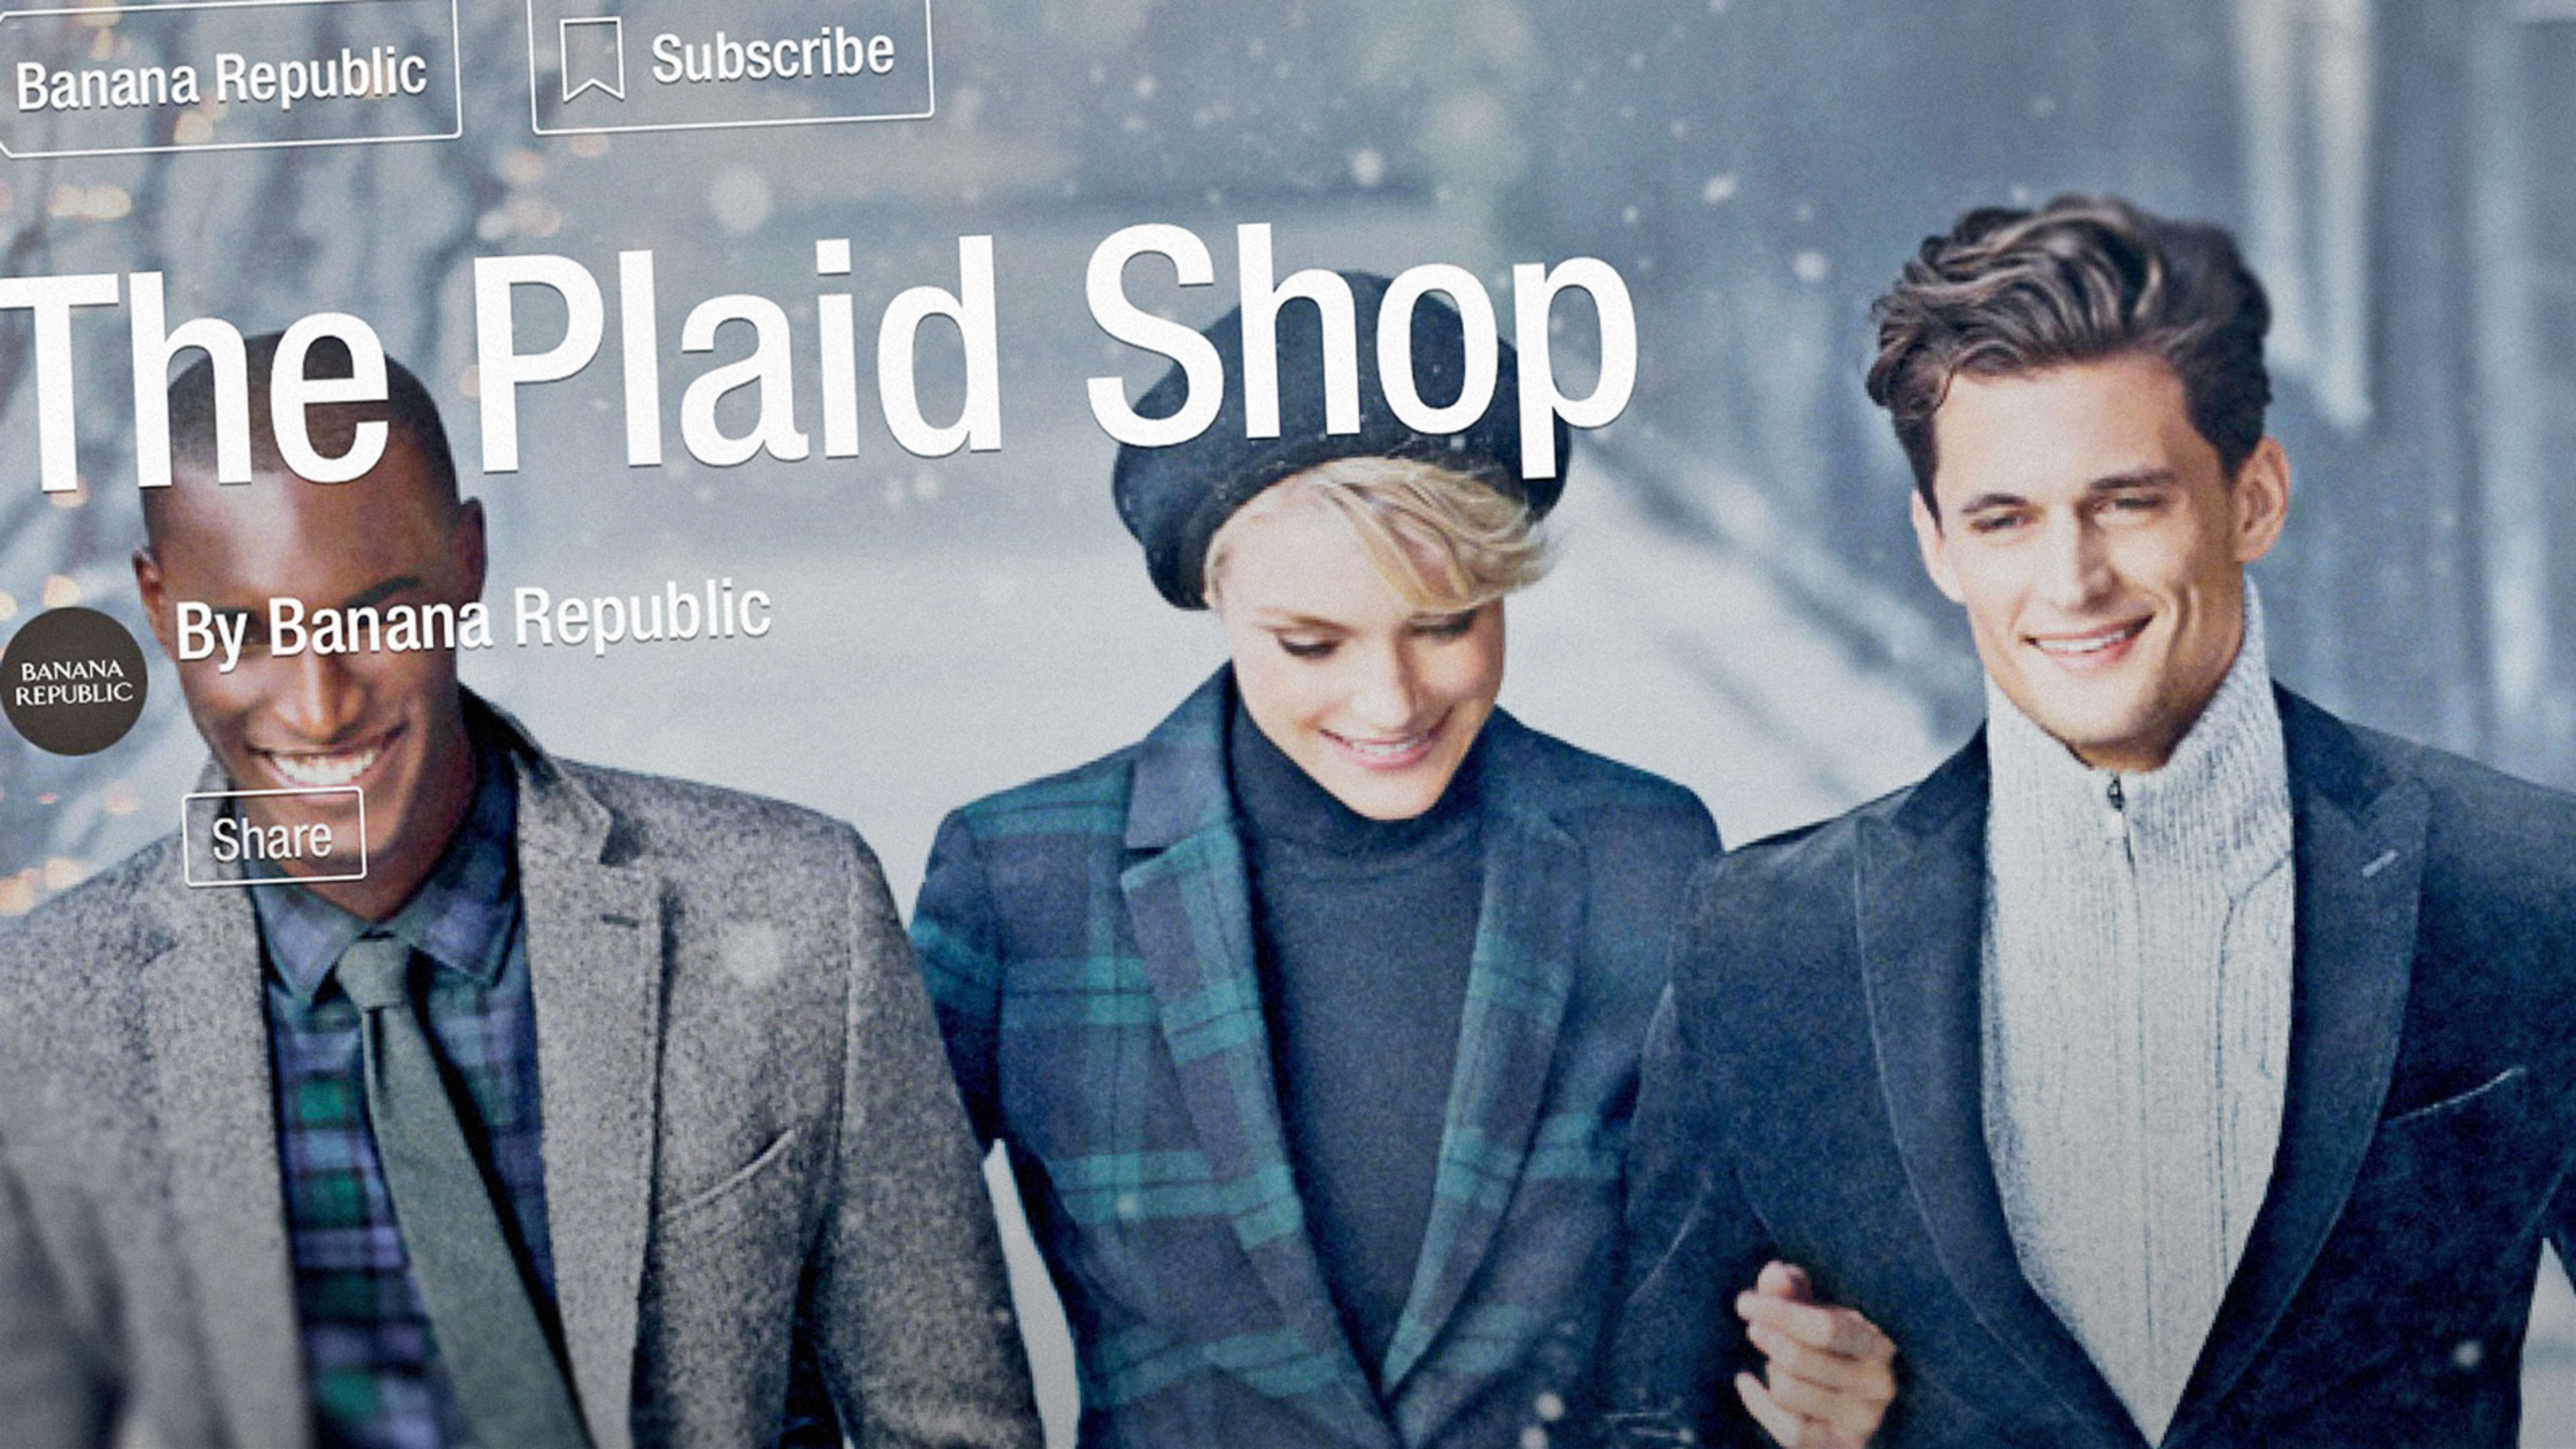 With 90M Users, Flipboard Launches Shopping Magazine Experience